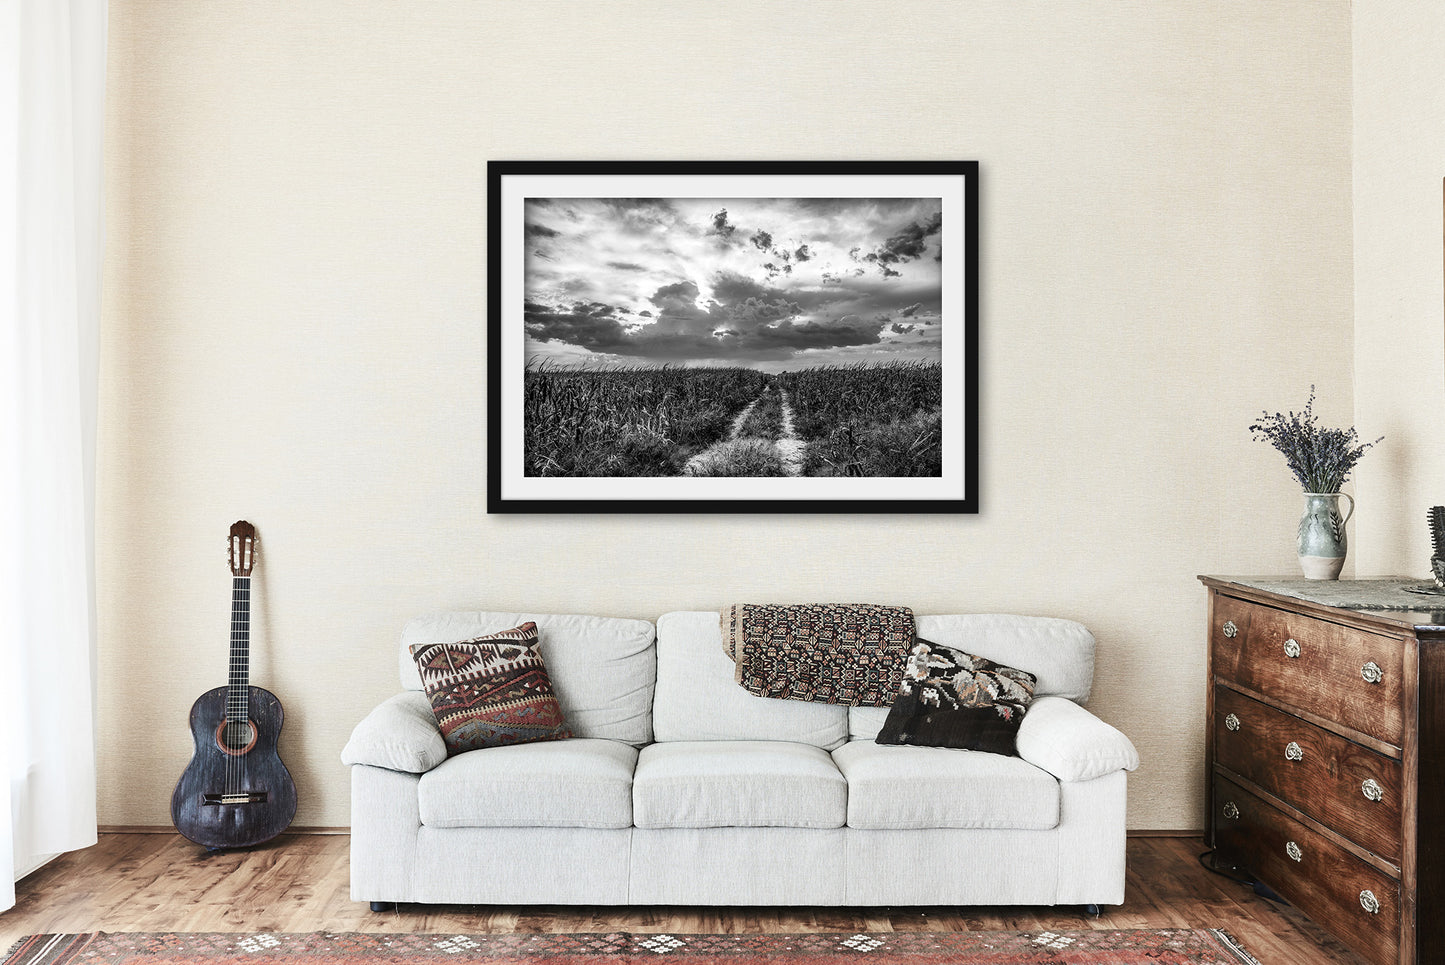 Corn Field Framed and Matted Print | Country Photo | Nebraska Decor | Black and White Photography | Farmhouse Wall Art | Ready to Hang